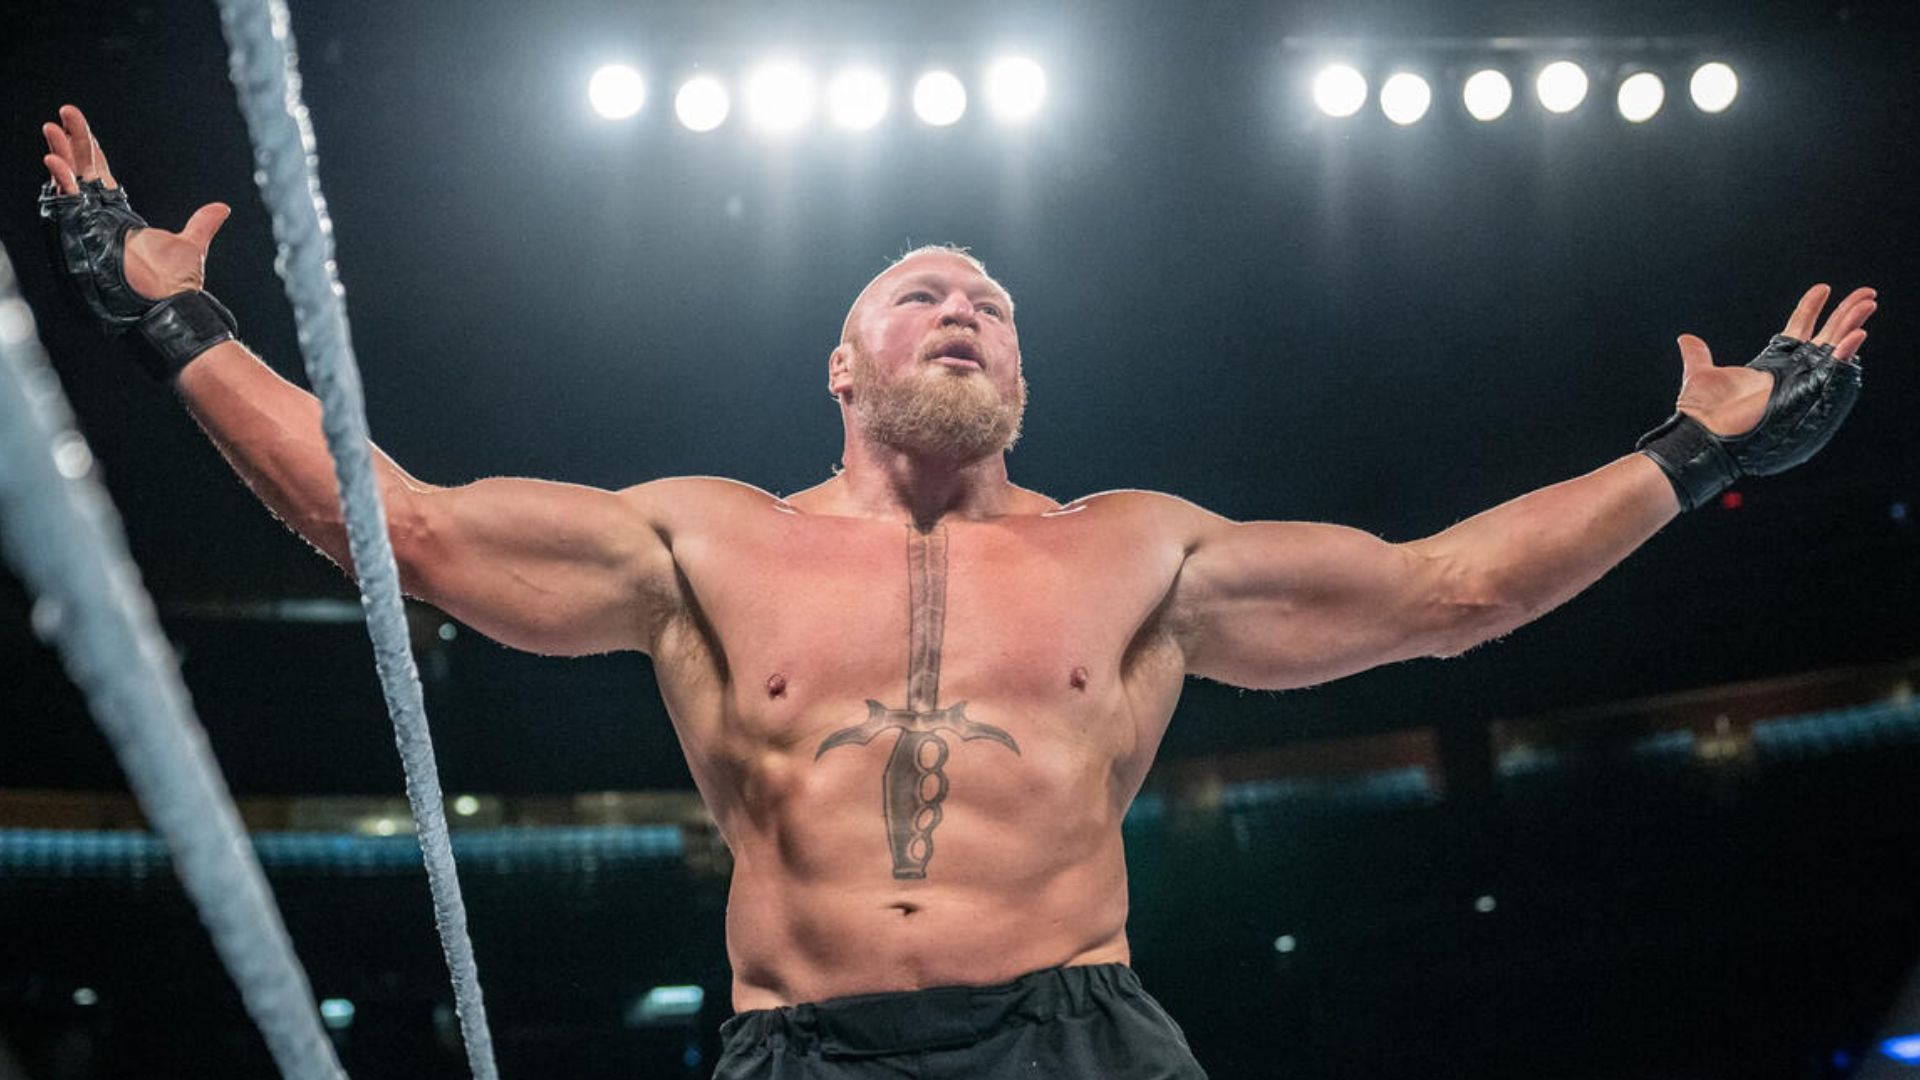 Lesnar has not competed in a match for a substantial amount of time.